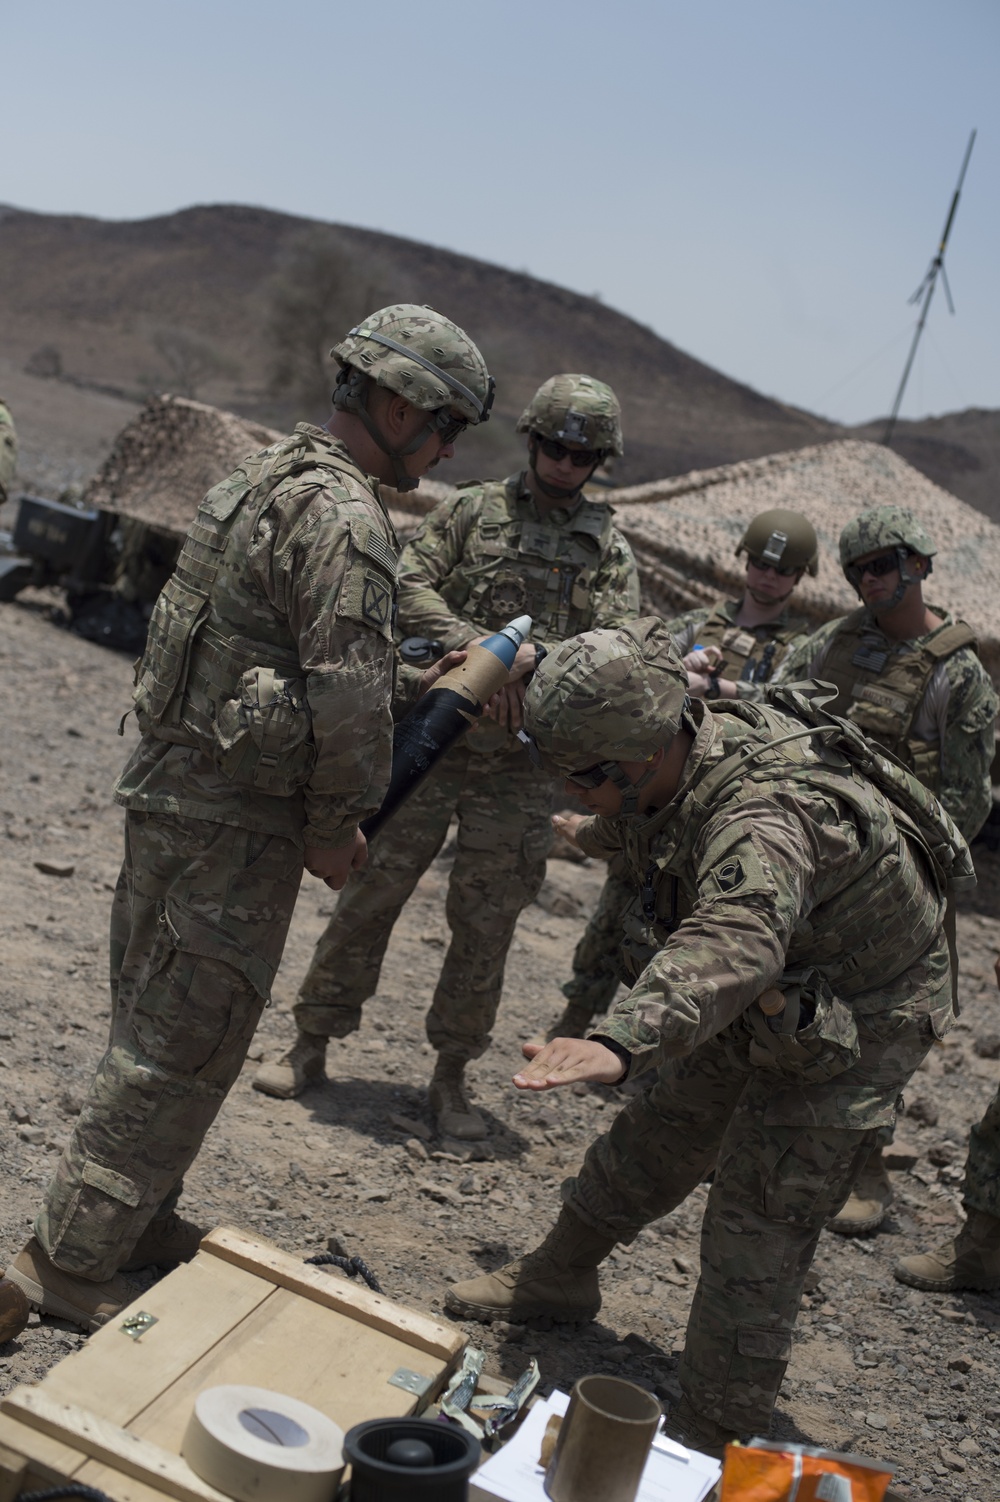 U.S. Army brings the boom: Soldiers conduct mortar fire training